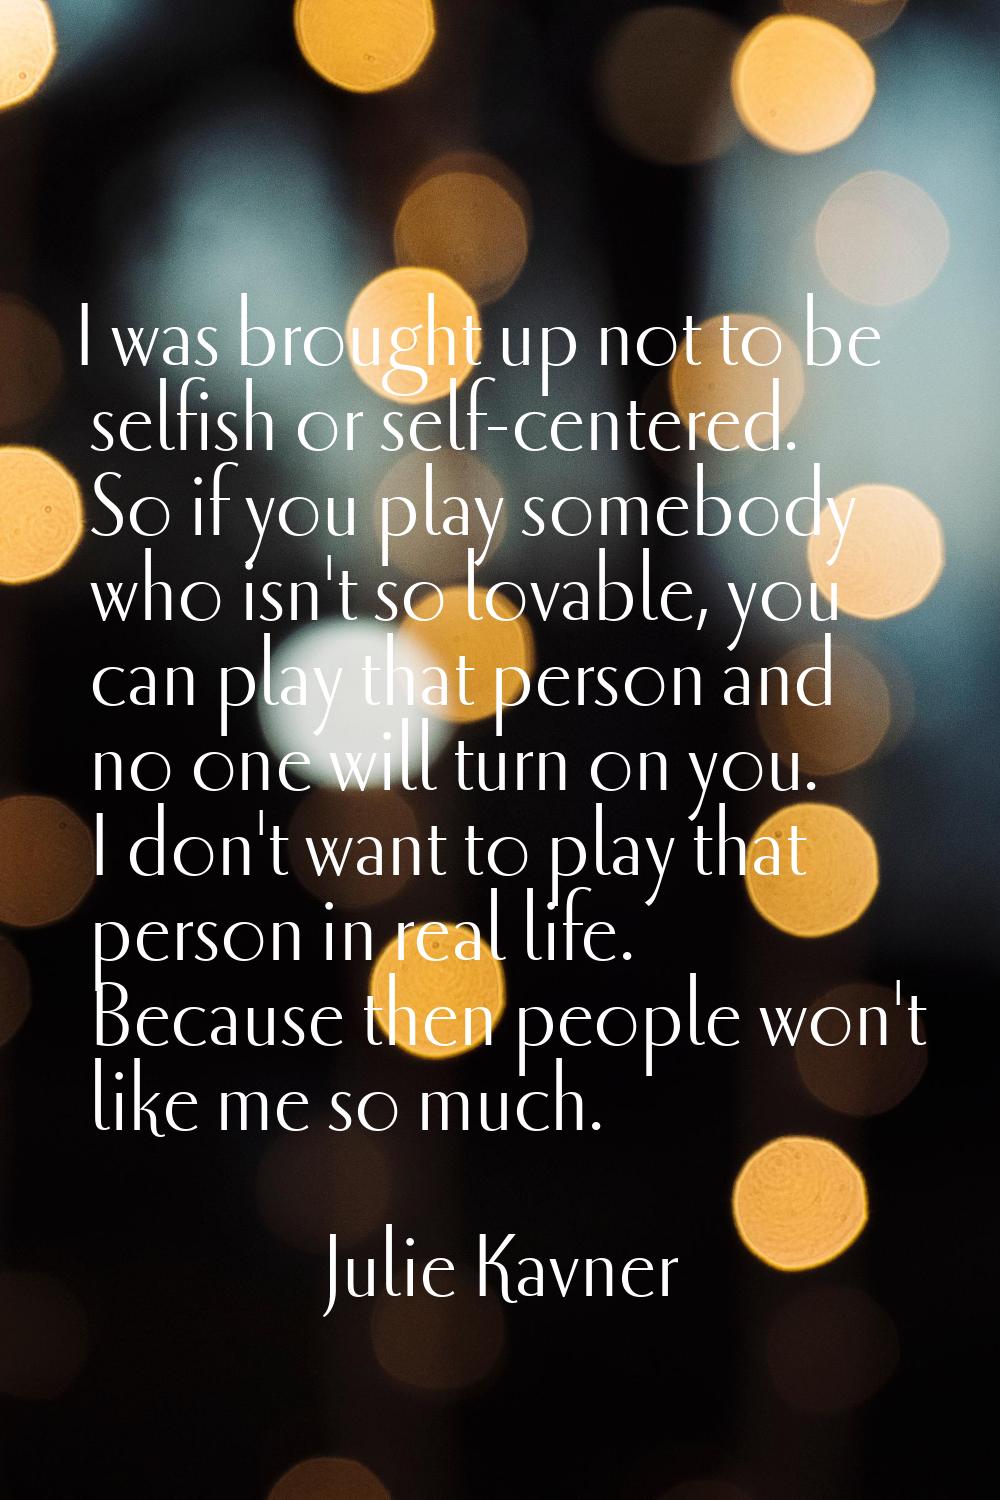 I was brought up not to be selfish or self-centered. So if you play somebody who isn't so lovable, 